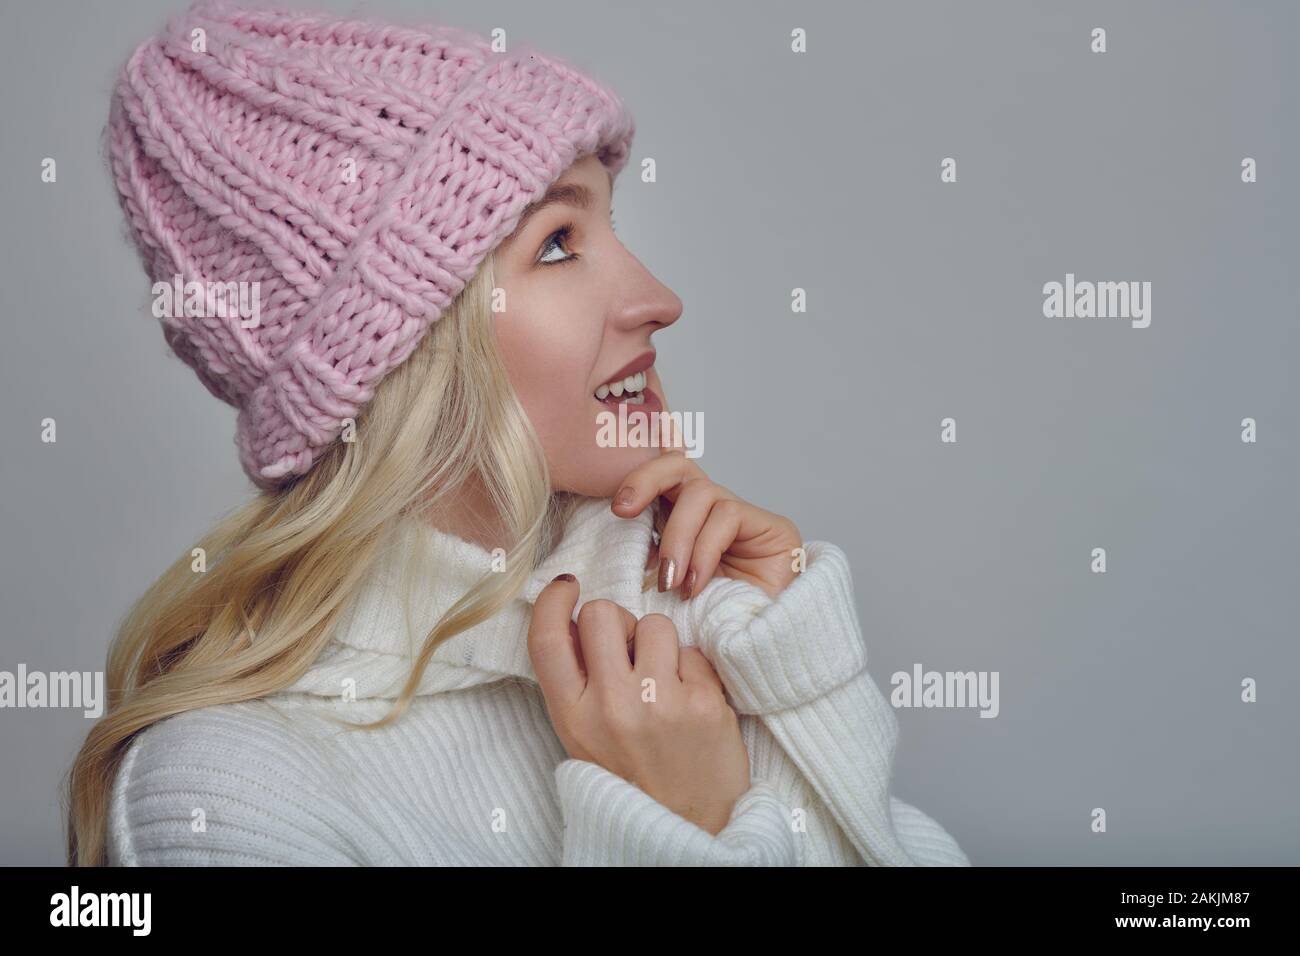 Pretty young blond woman in woollen winter outfit cuddling into the warmth of her polo neck sweater with a happy smile while wearing a pink knitted ca Stock Photo